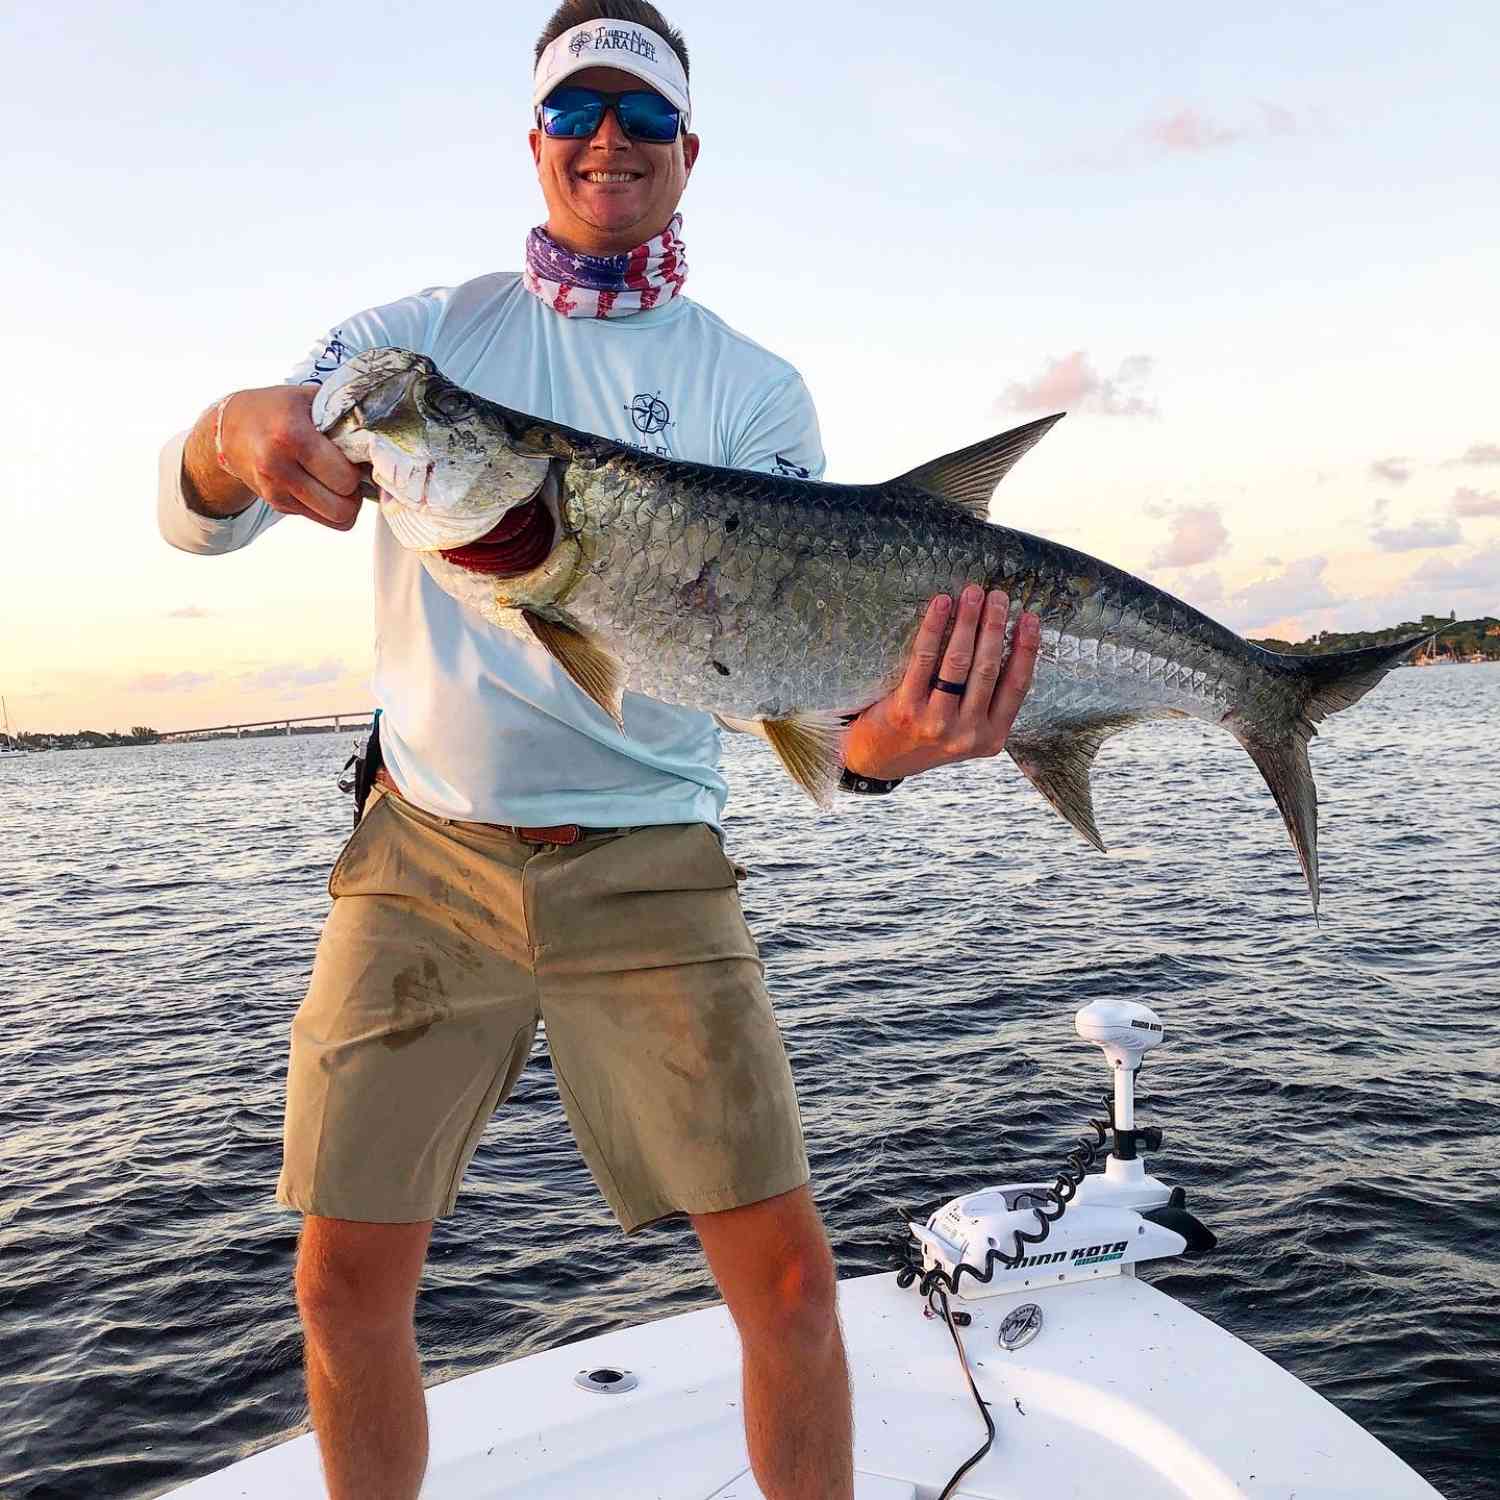 Title: First Tarpon - On board their Sportsman Masters 207 Bay Boat - Location: Stuart, FL. Participating in the Photo Contest #SportsmanNovember2020